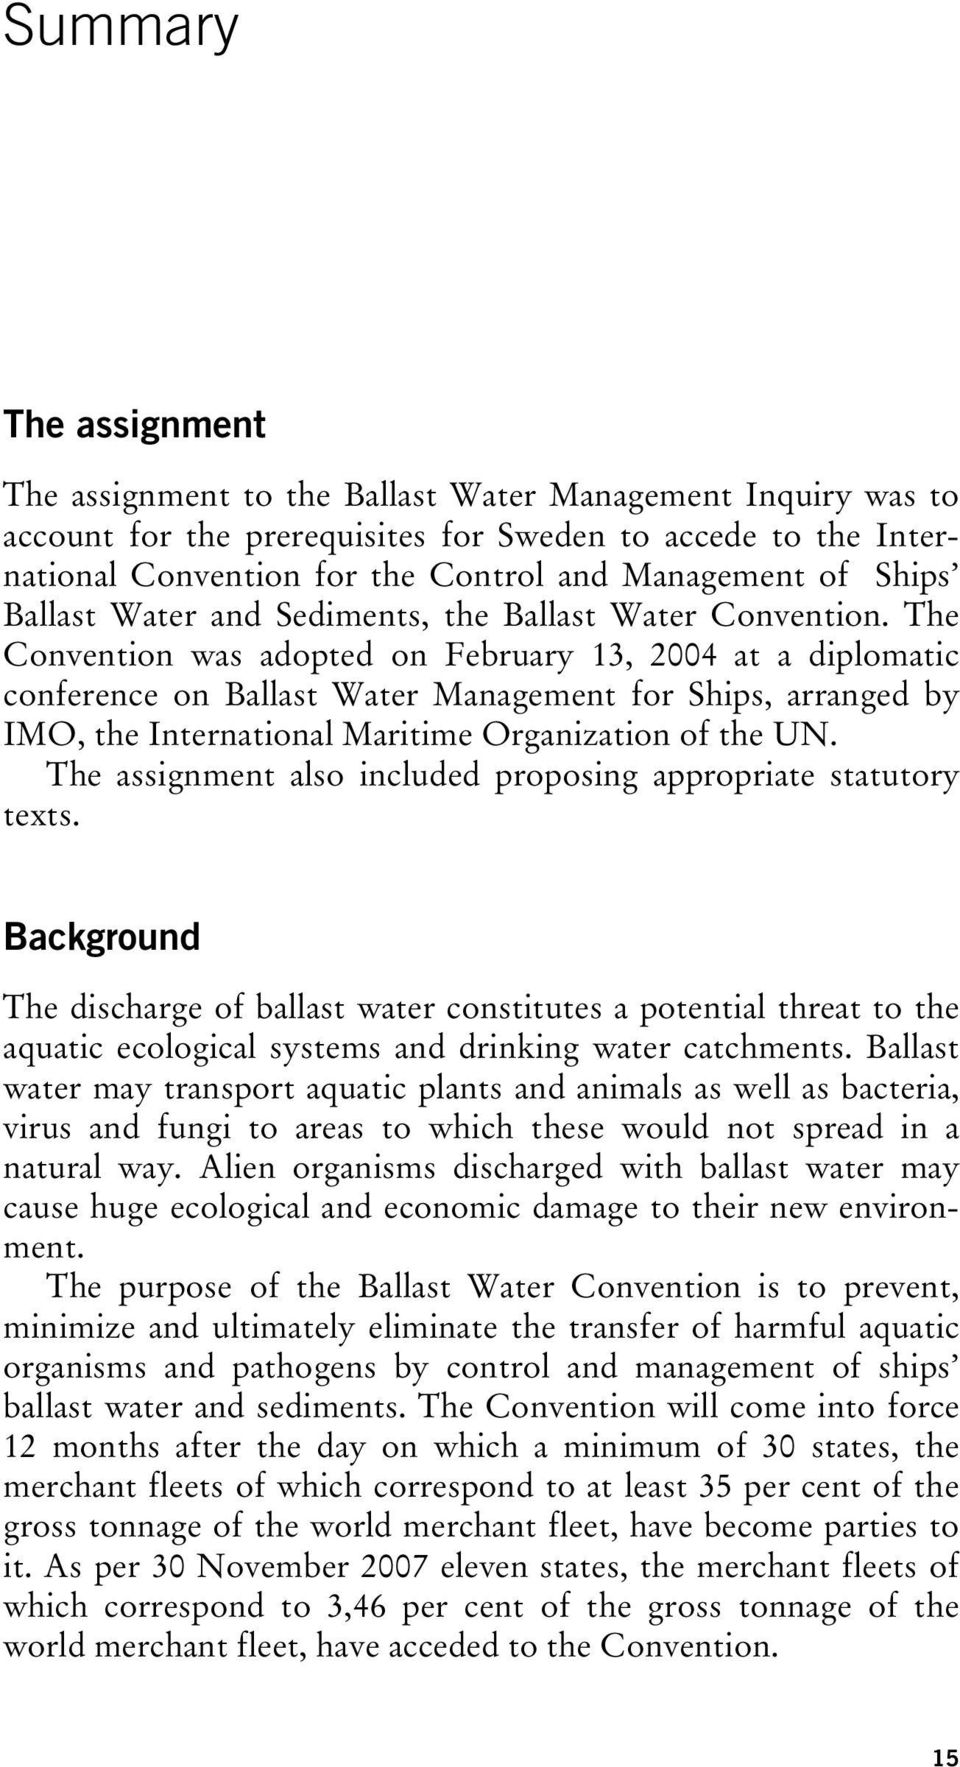 The Convention was adopted on February 13, 2004 at a diplomatic conference on Ballast Water Management for Ships, arranged by IMO, the International Maritime Organization of the UN.